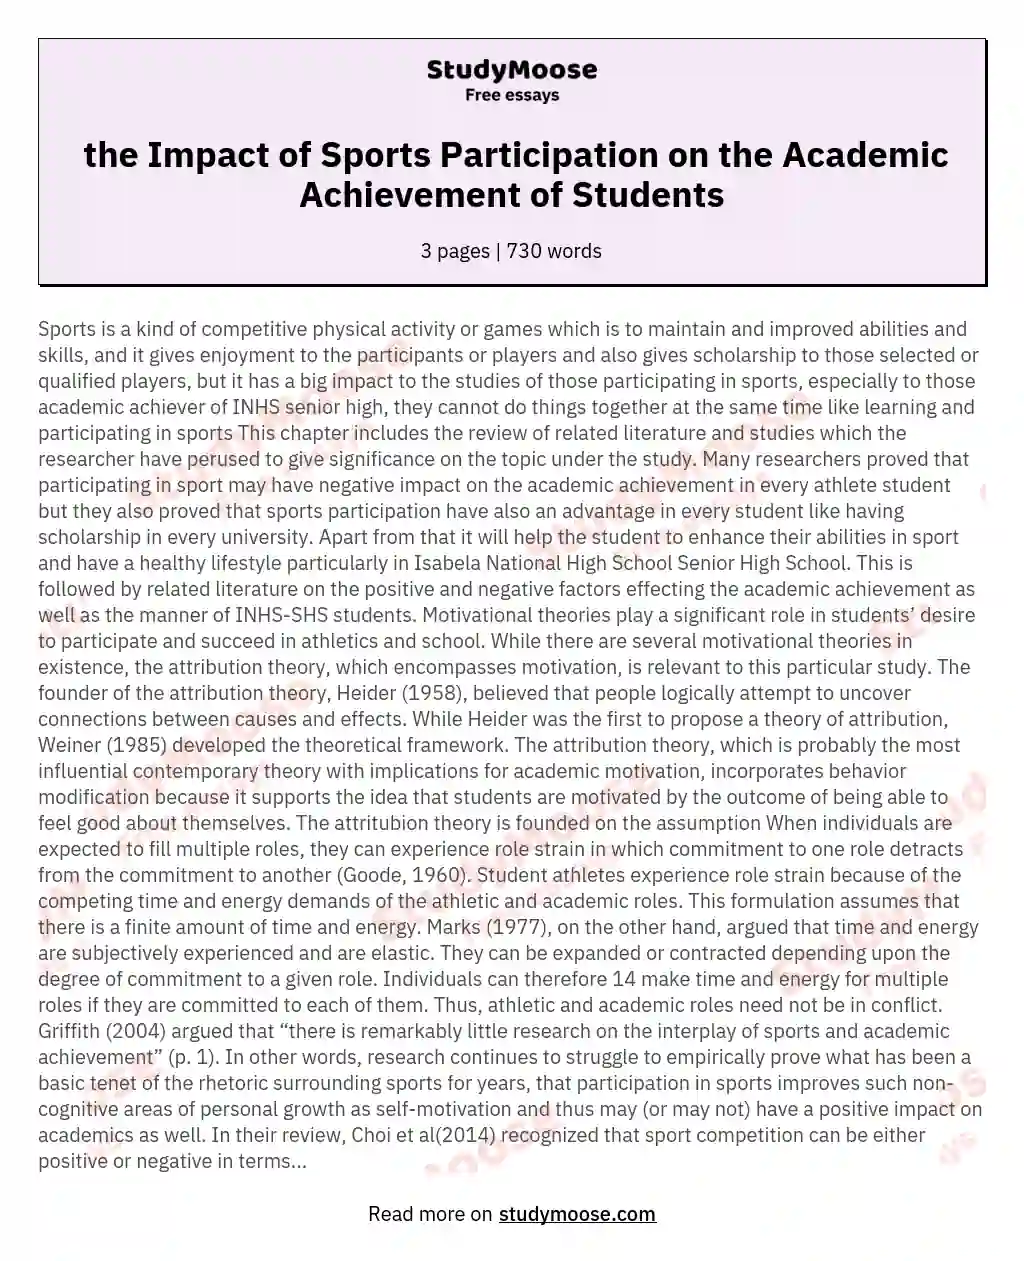  the Impact of Sports Participation on the Academic Achievement of Students essay